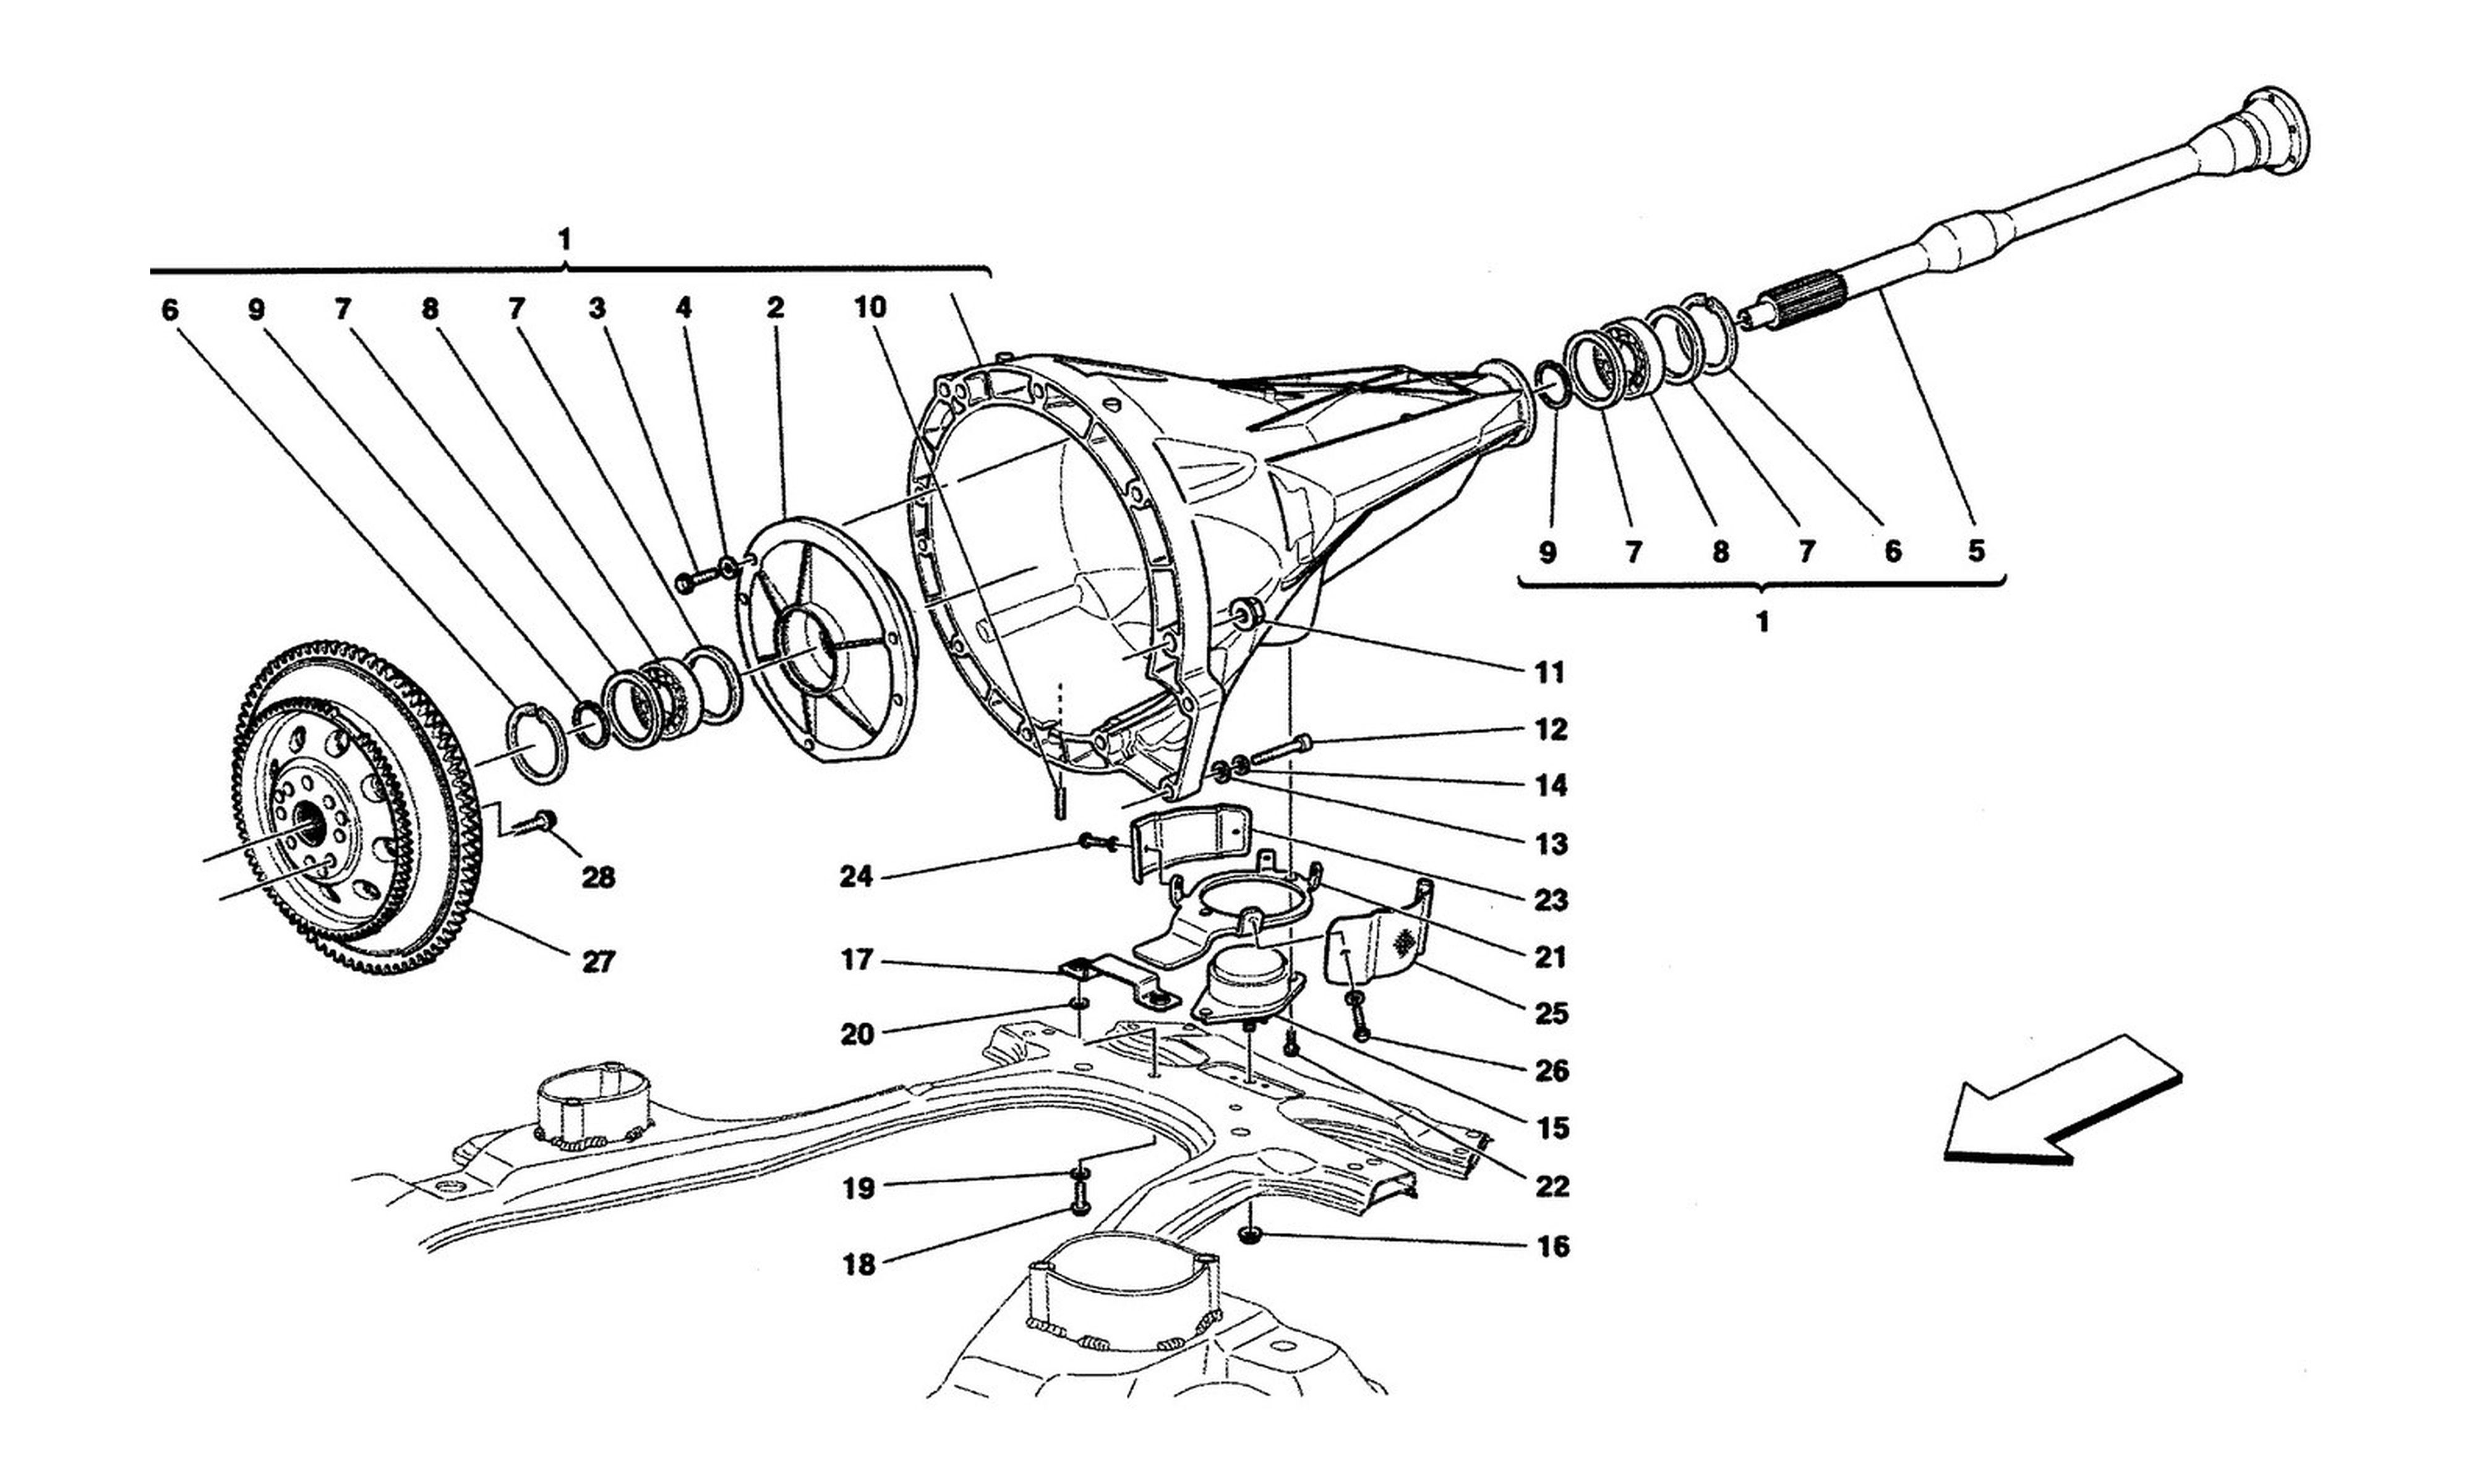 Schematic: Trasmission Housing For Dct Gearbox